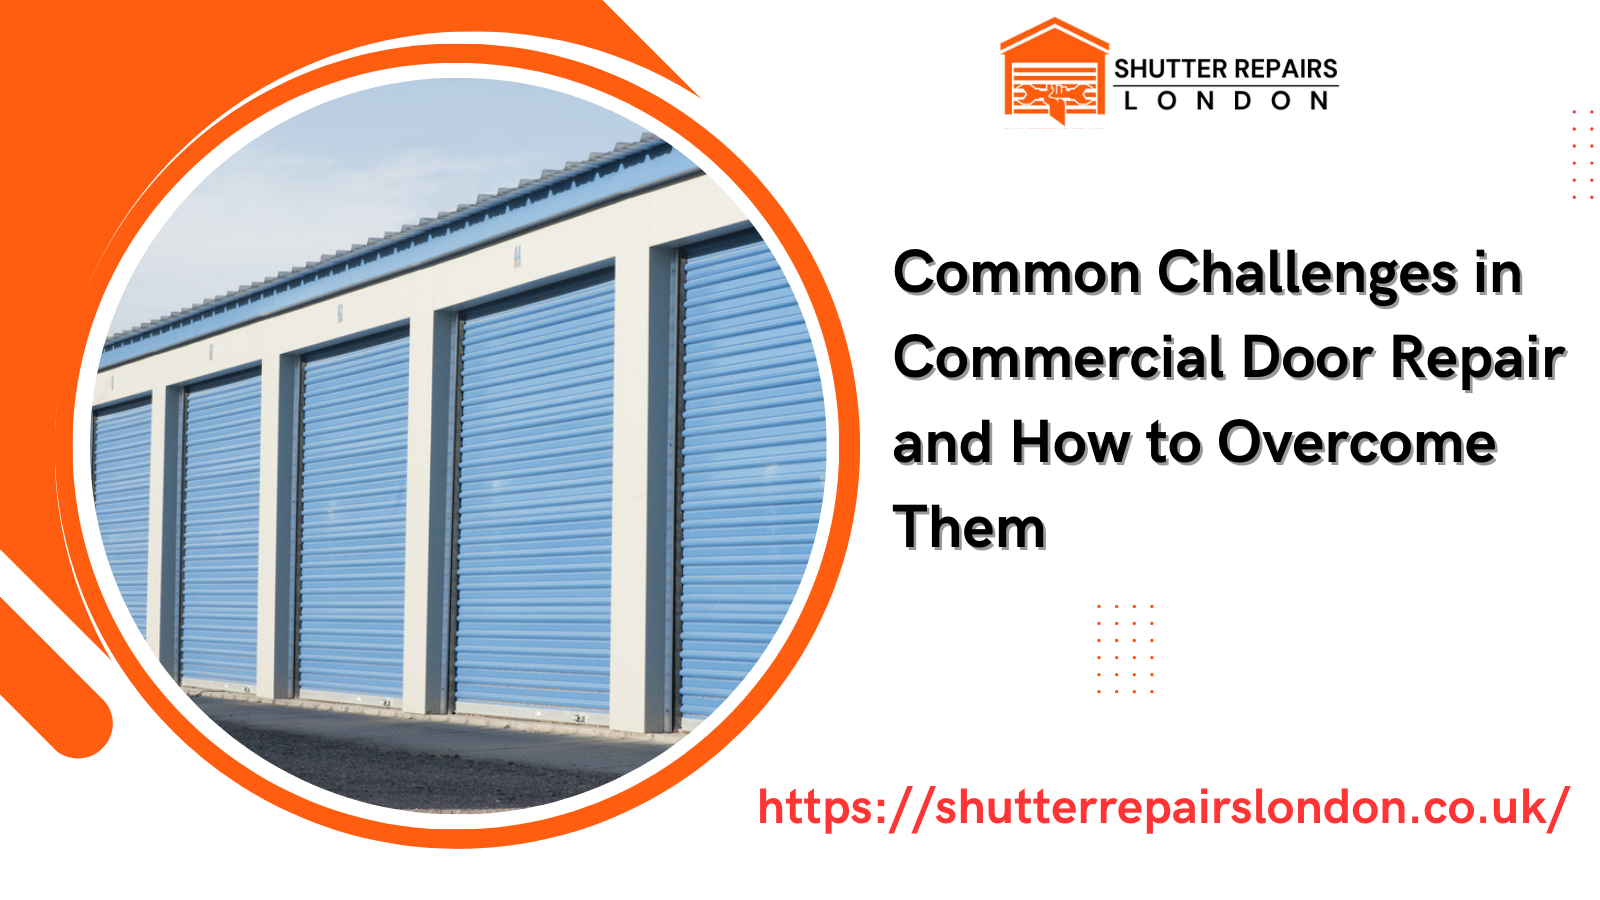 Common Challenges in Commercial Door Repair and How to Overcome Them